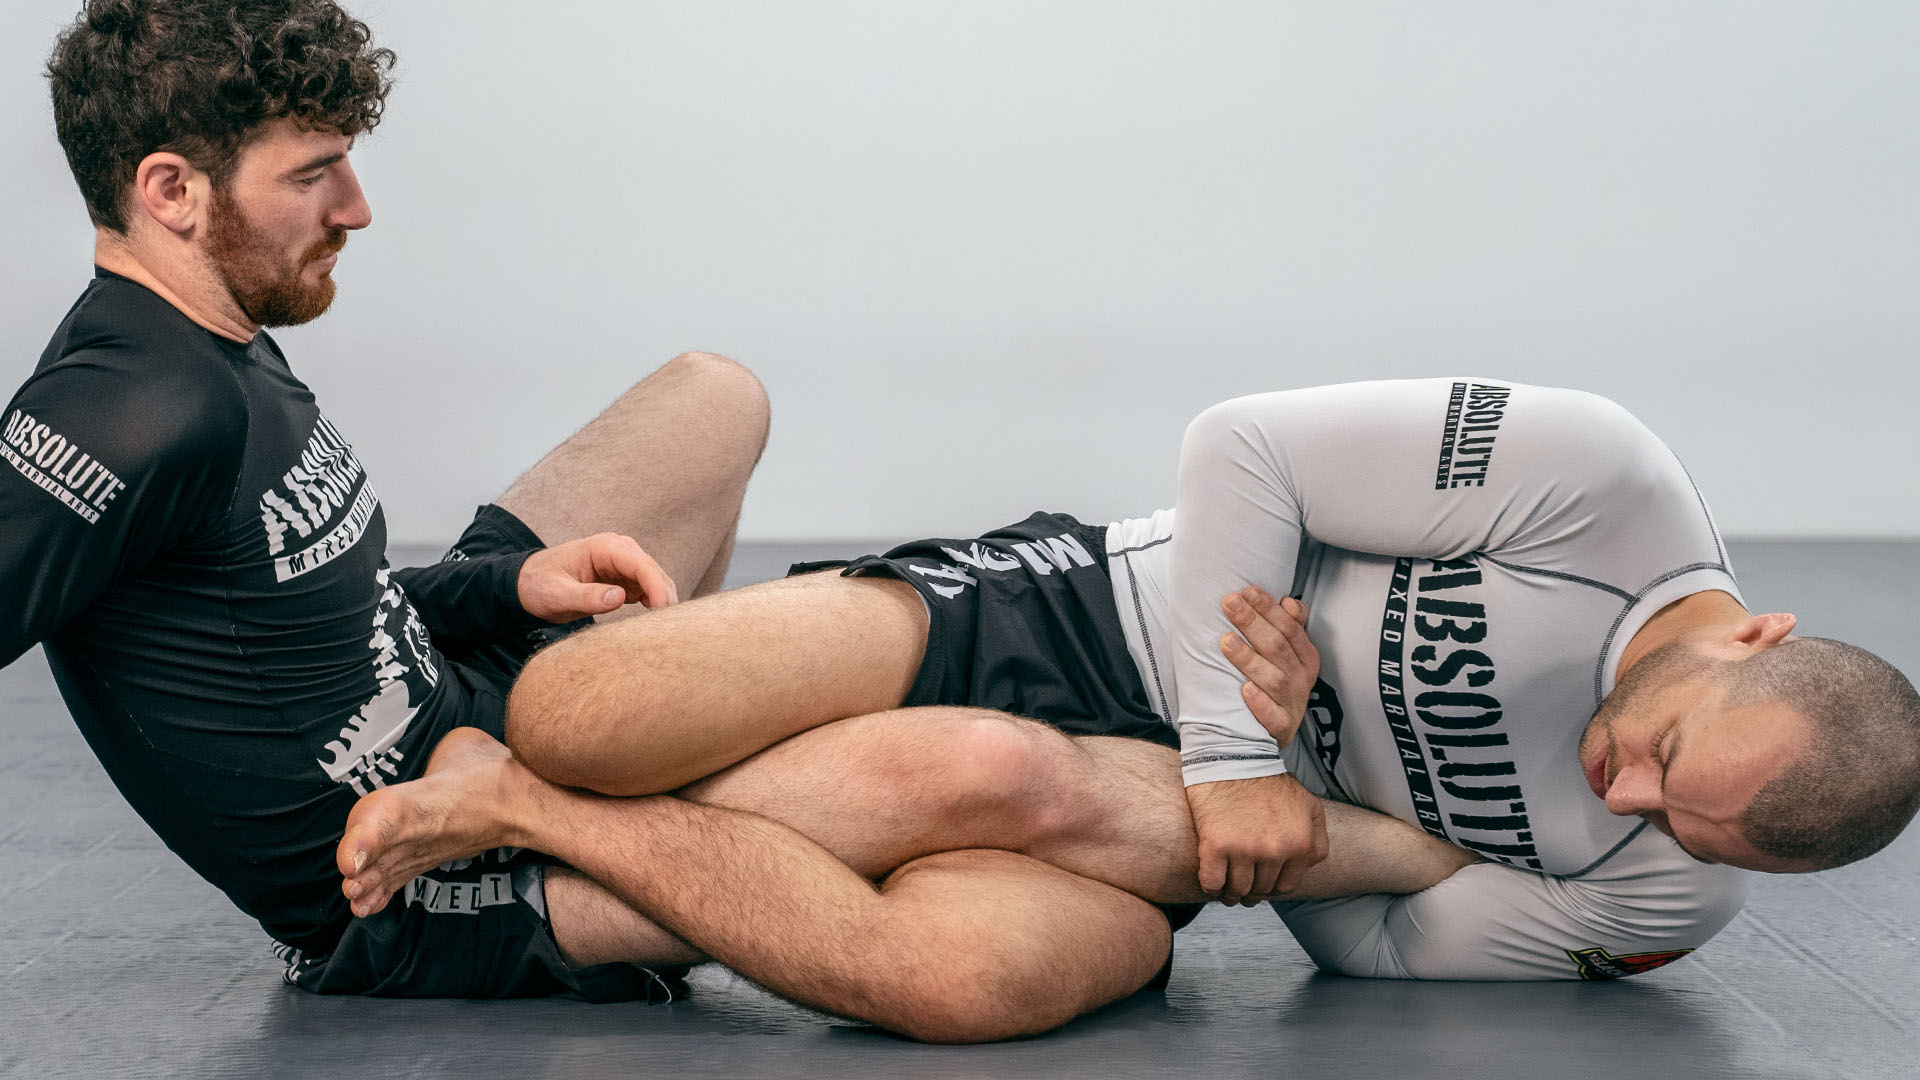 Straight Ankle Lock” by Lachlan Giles • SUBMETA